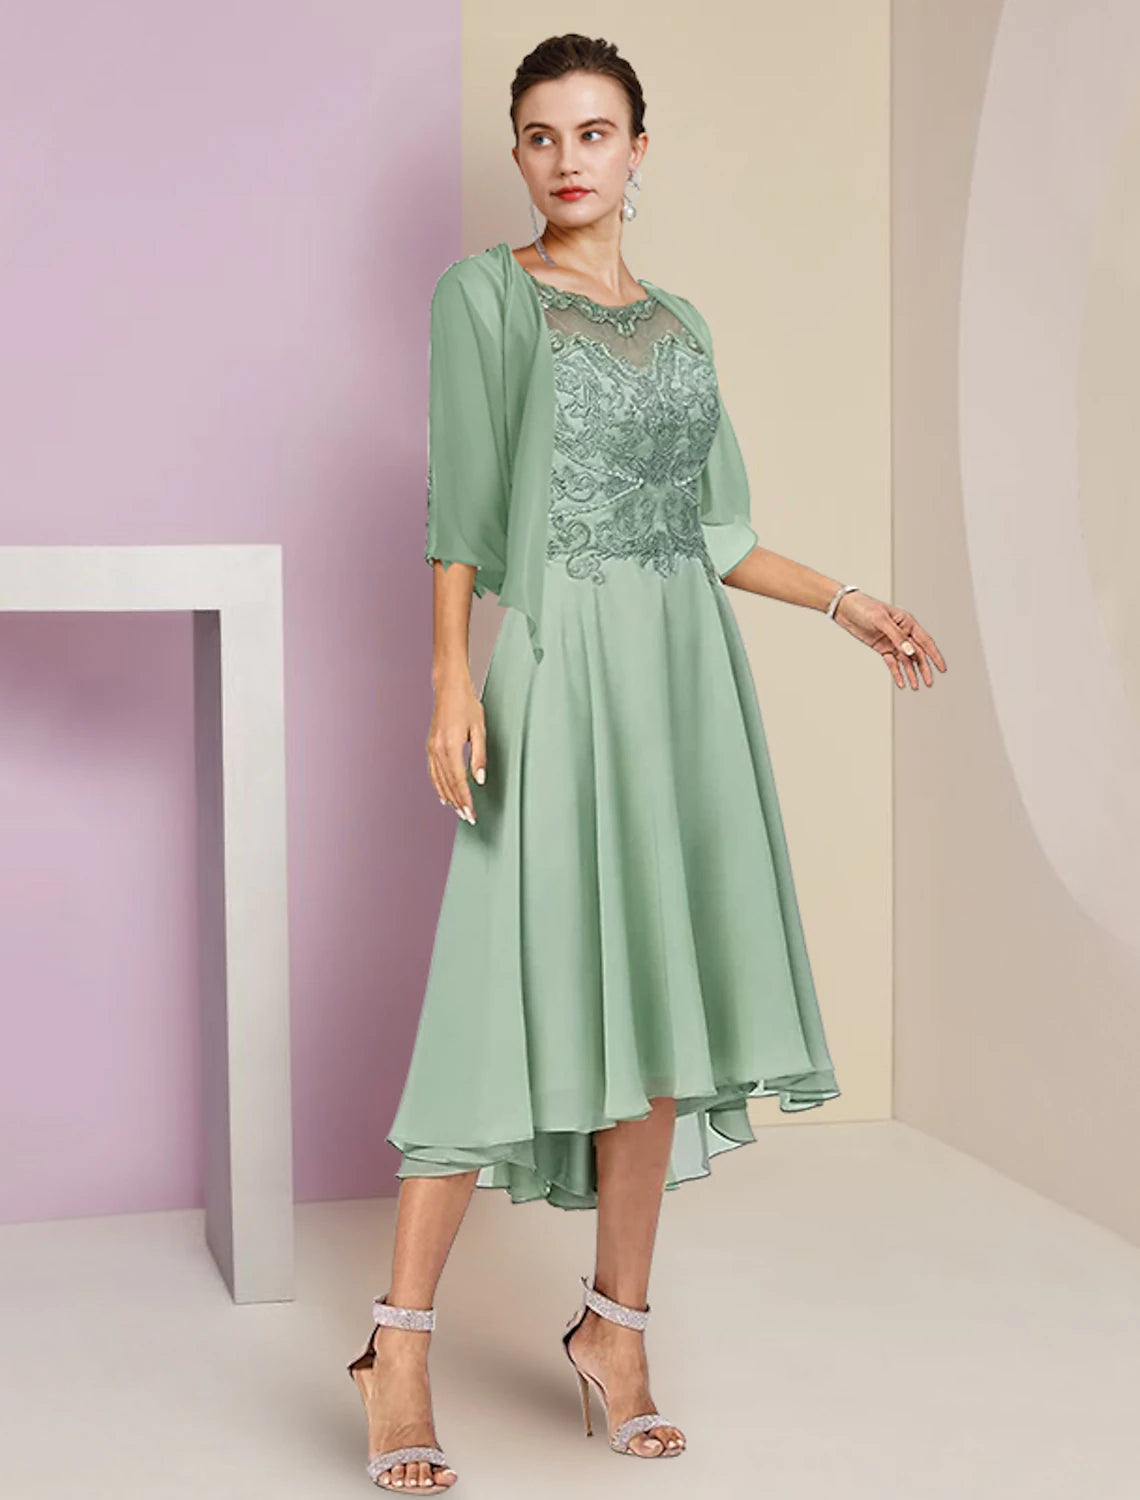 Two Piece A-Line Mother of the Bride Dress Formal Wedding Guest Elegant High Low Scoop Neck Asymmetrical Tea Length Chiffon Lace Half Sleeve Wrap Included with Beading Appliques